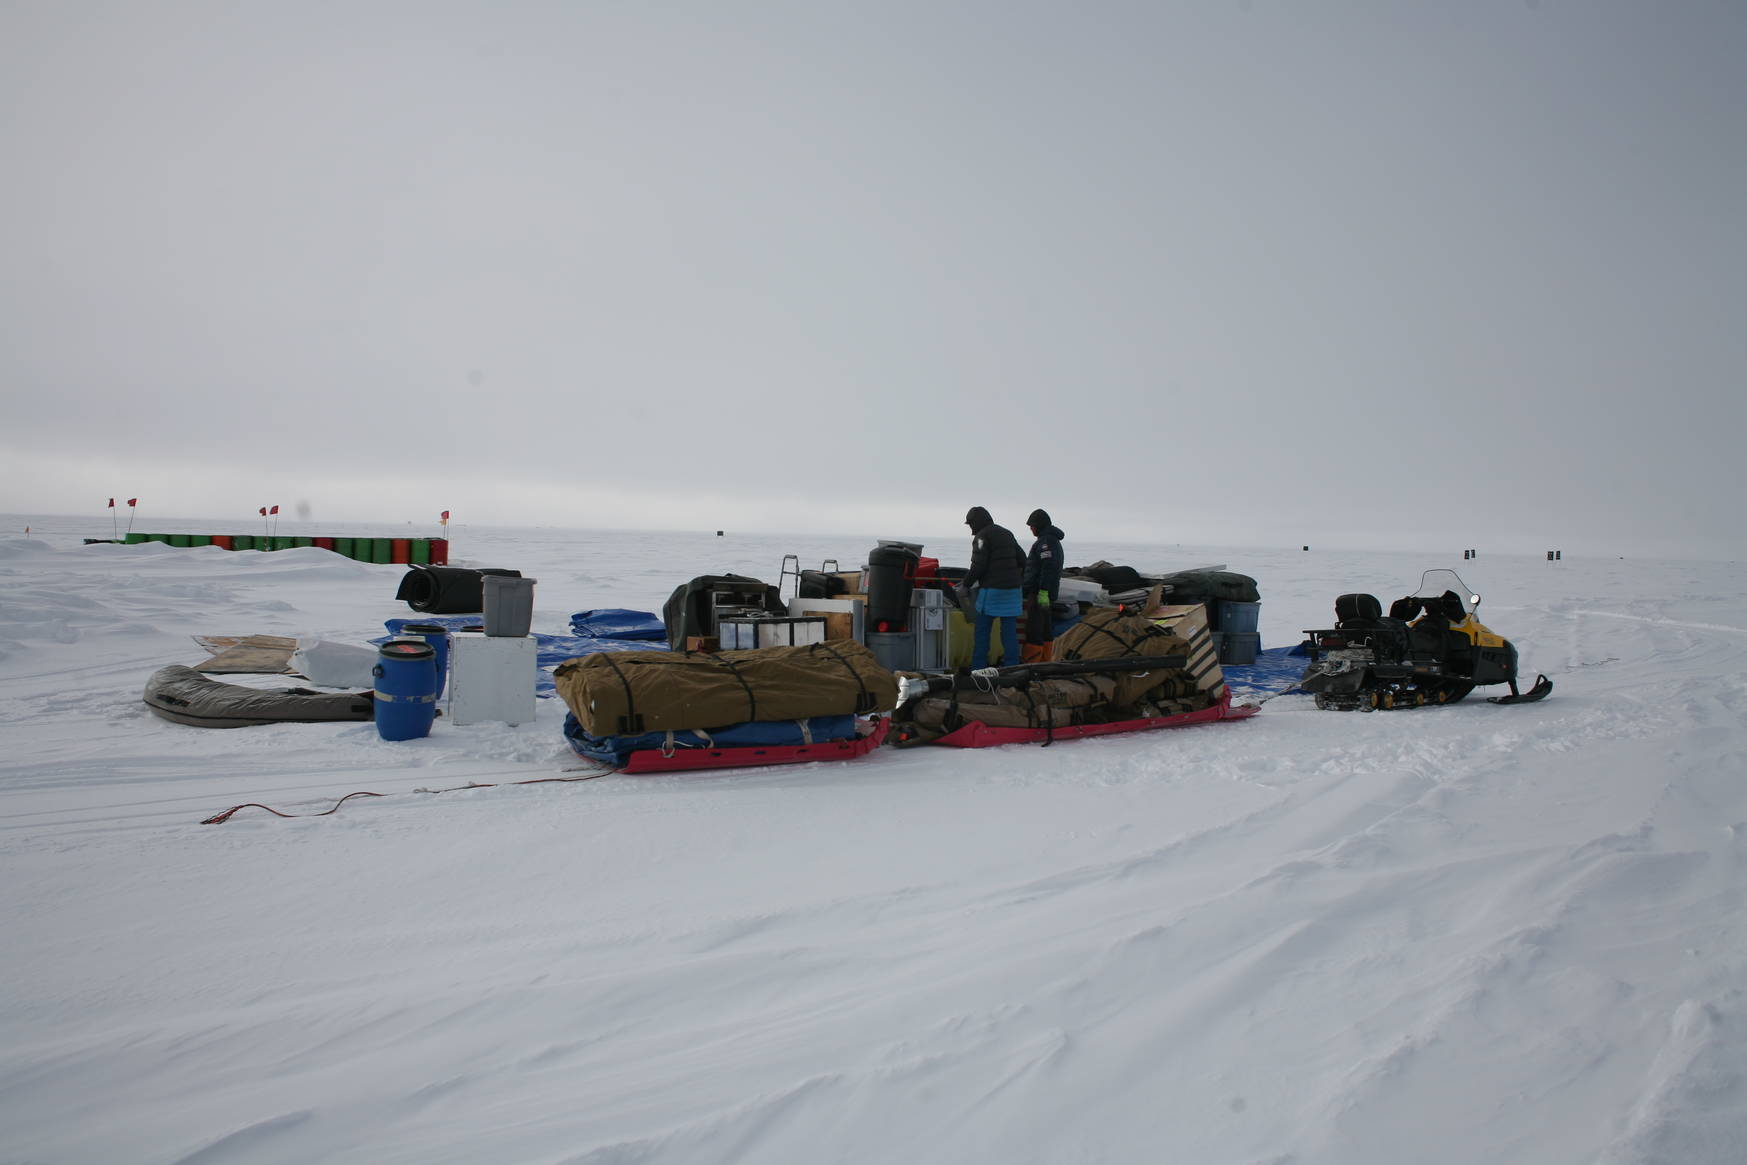 During the winter the camping equipment remains at the south pole.